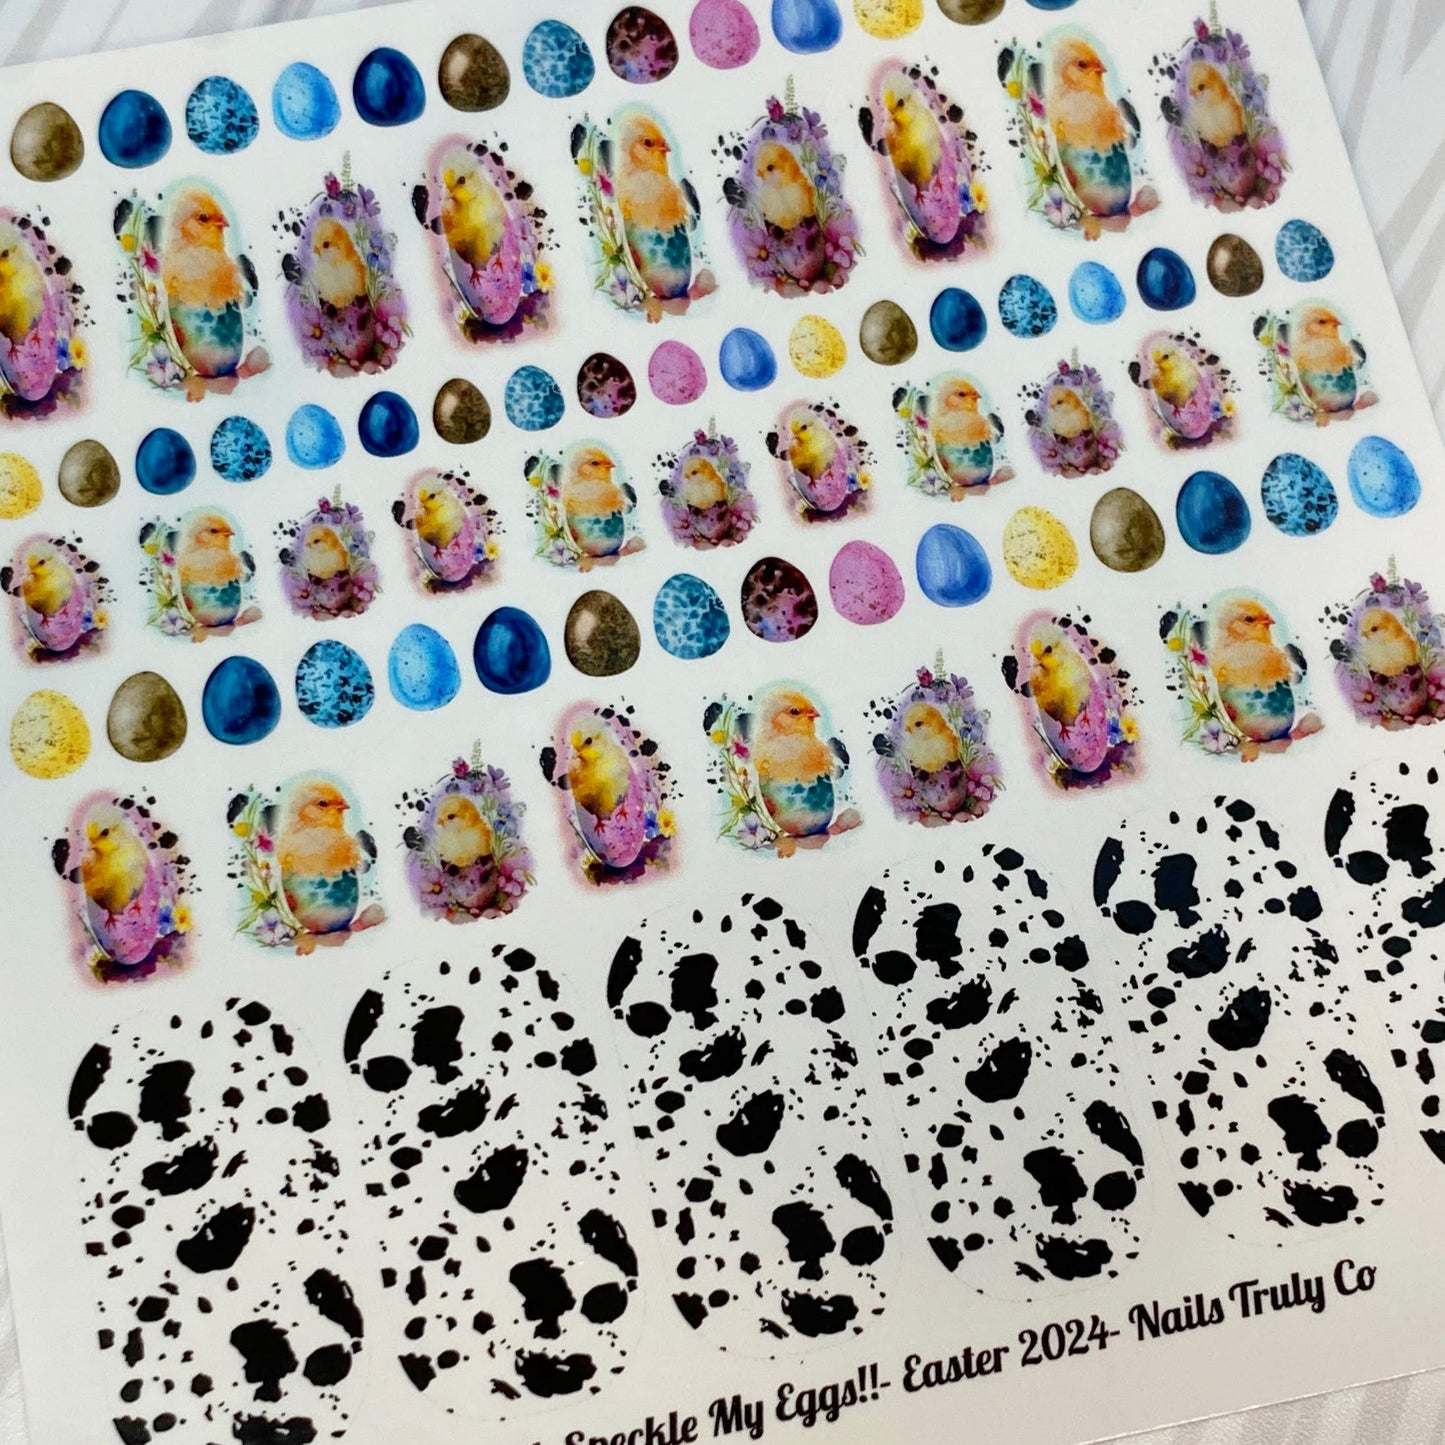 Well, Speckle My Eggs!! - Nail Art Mani Sheet